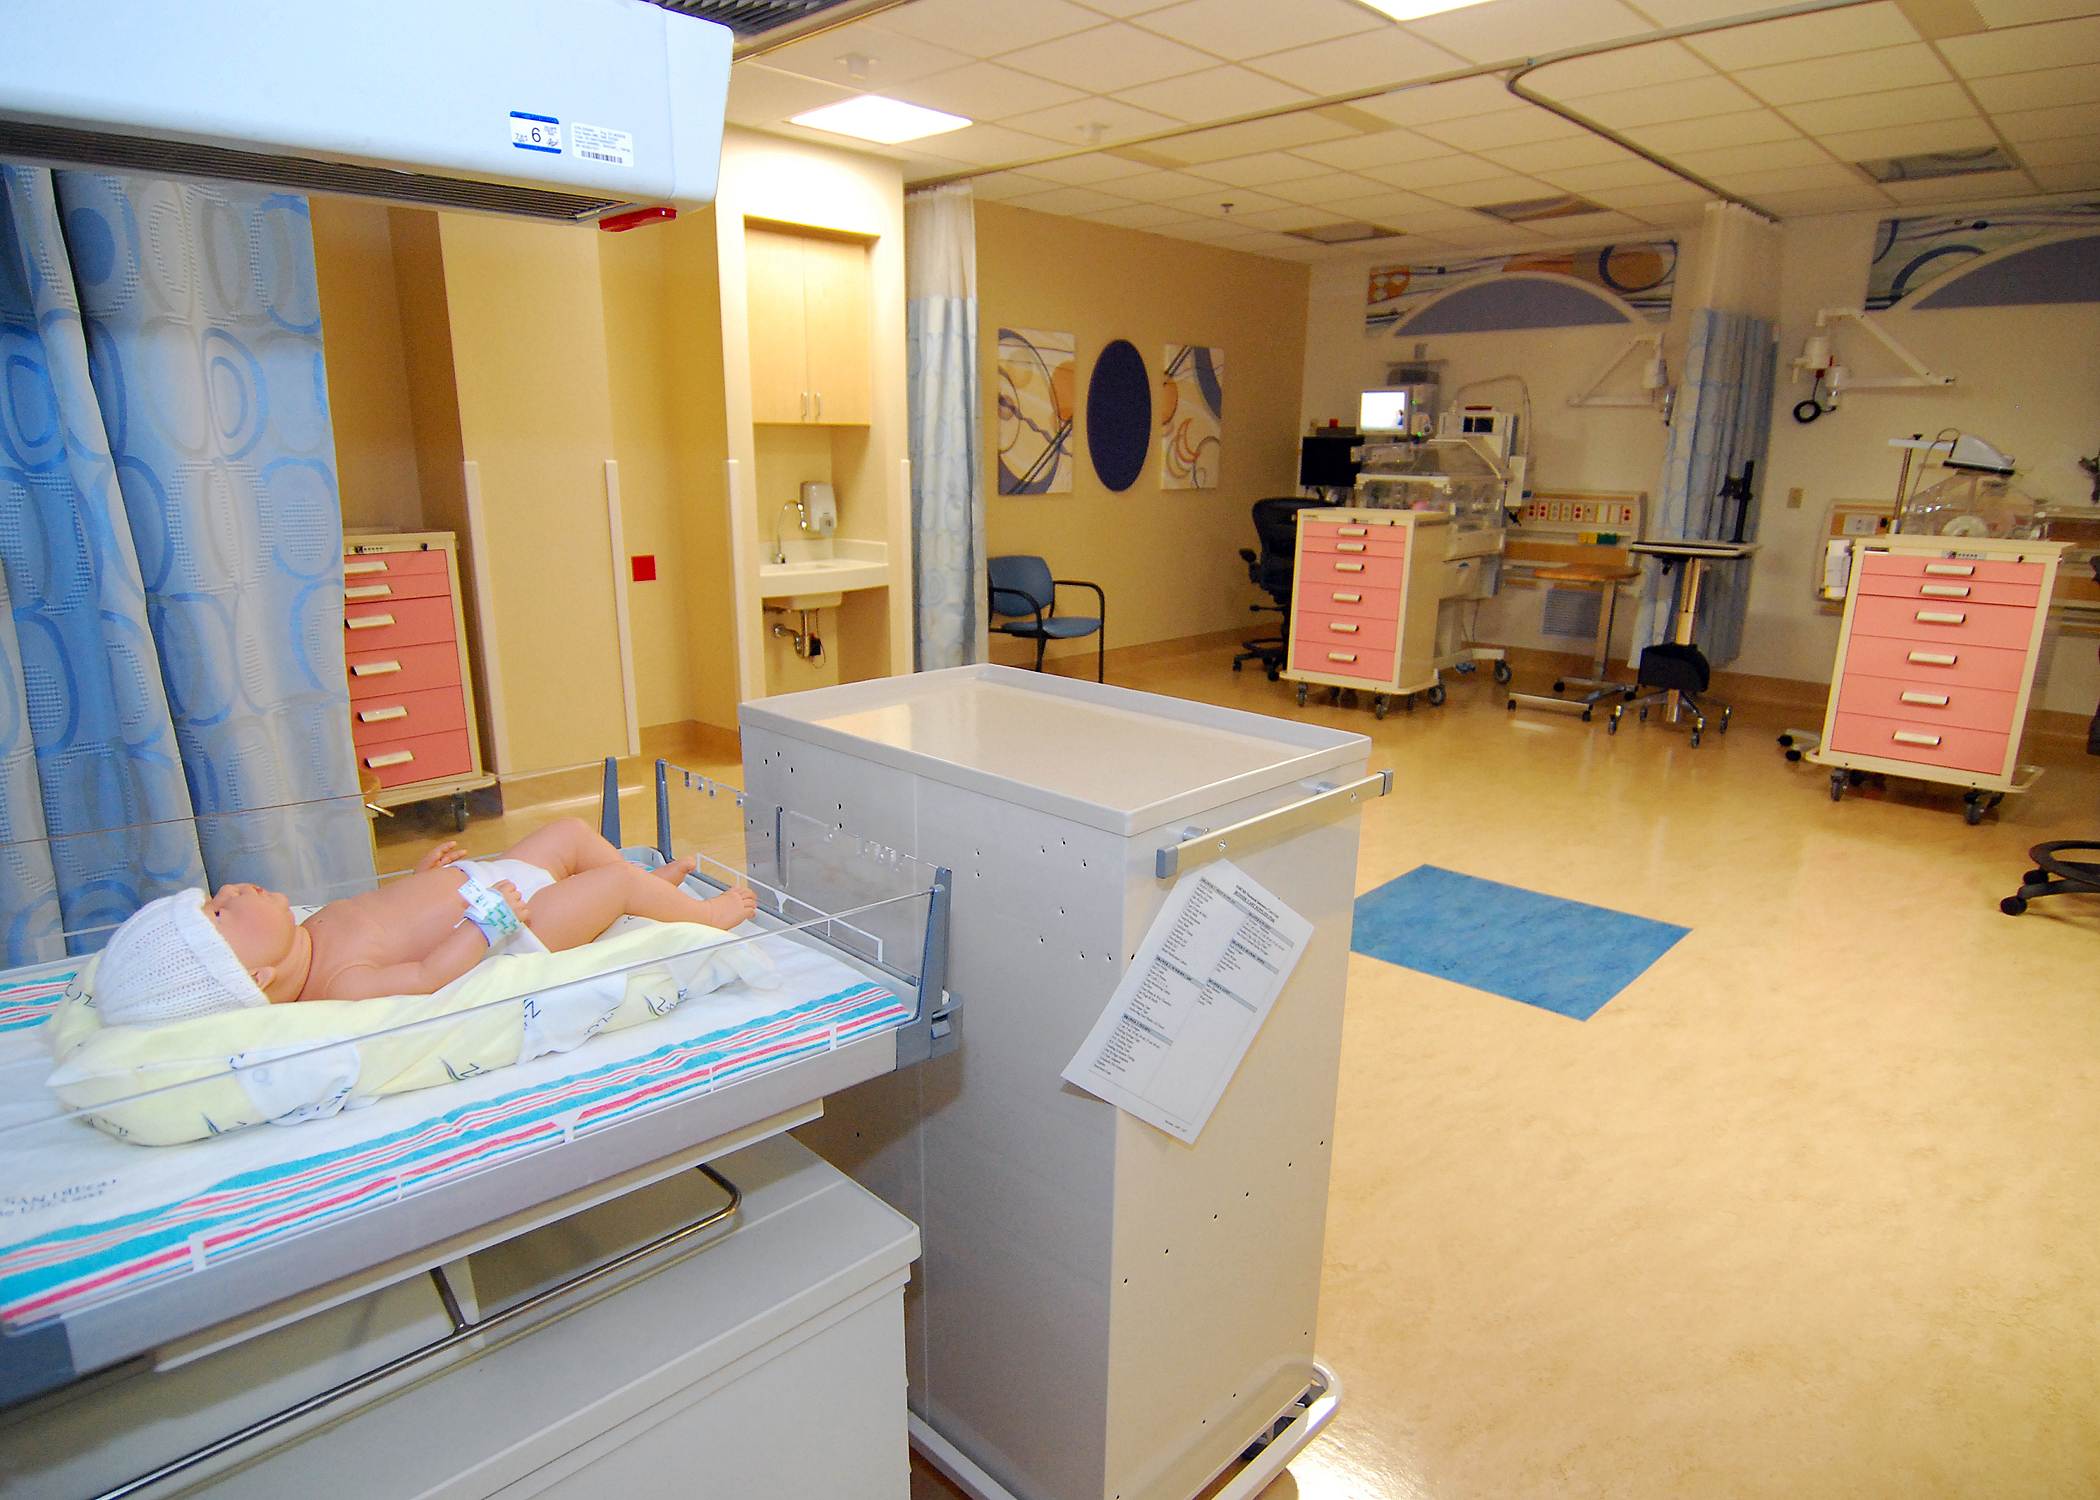 US Navy 090814-N-6326B-001 A mock set-up of the new pod design in the Neonatal Intensive Care Unit (NICU) at Naval Medical Center San Diego (NMCSD) is on display during an open house